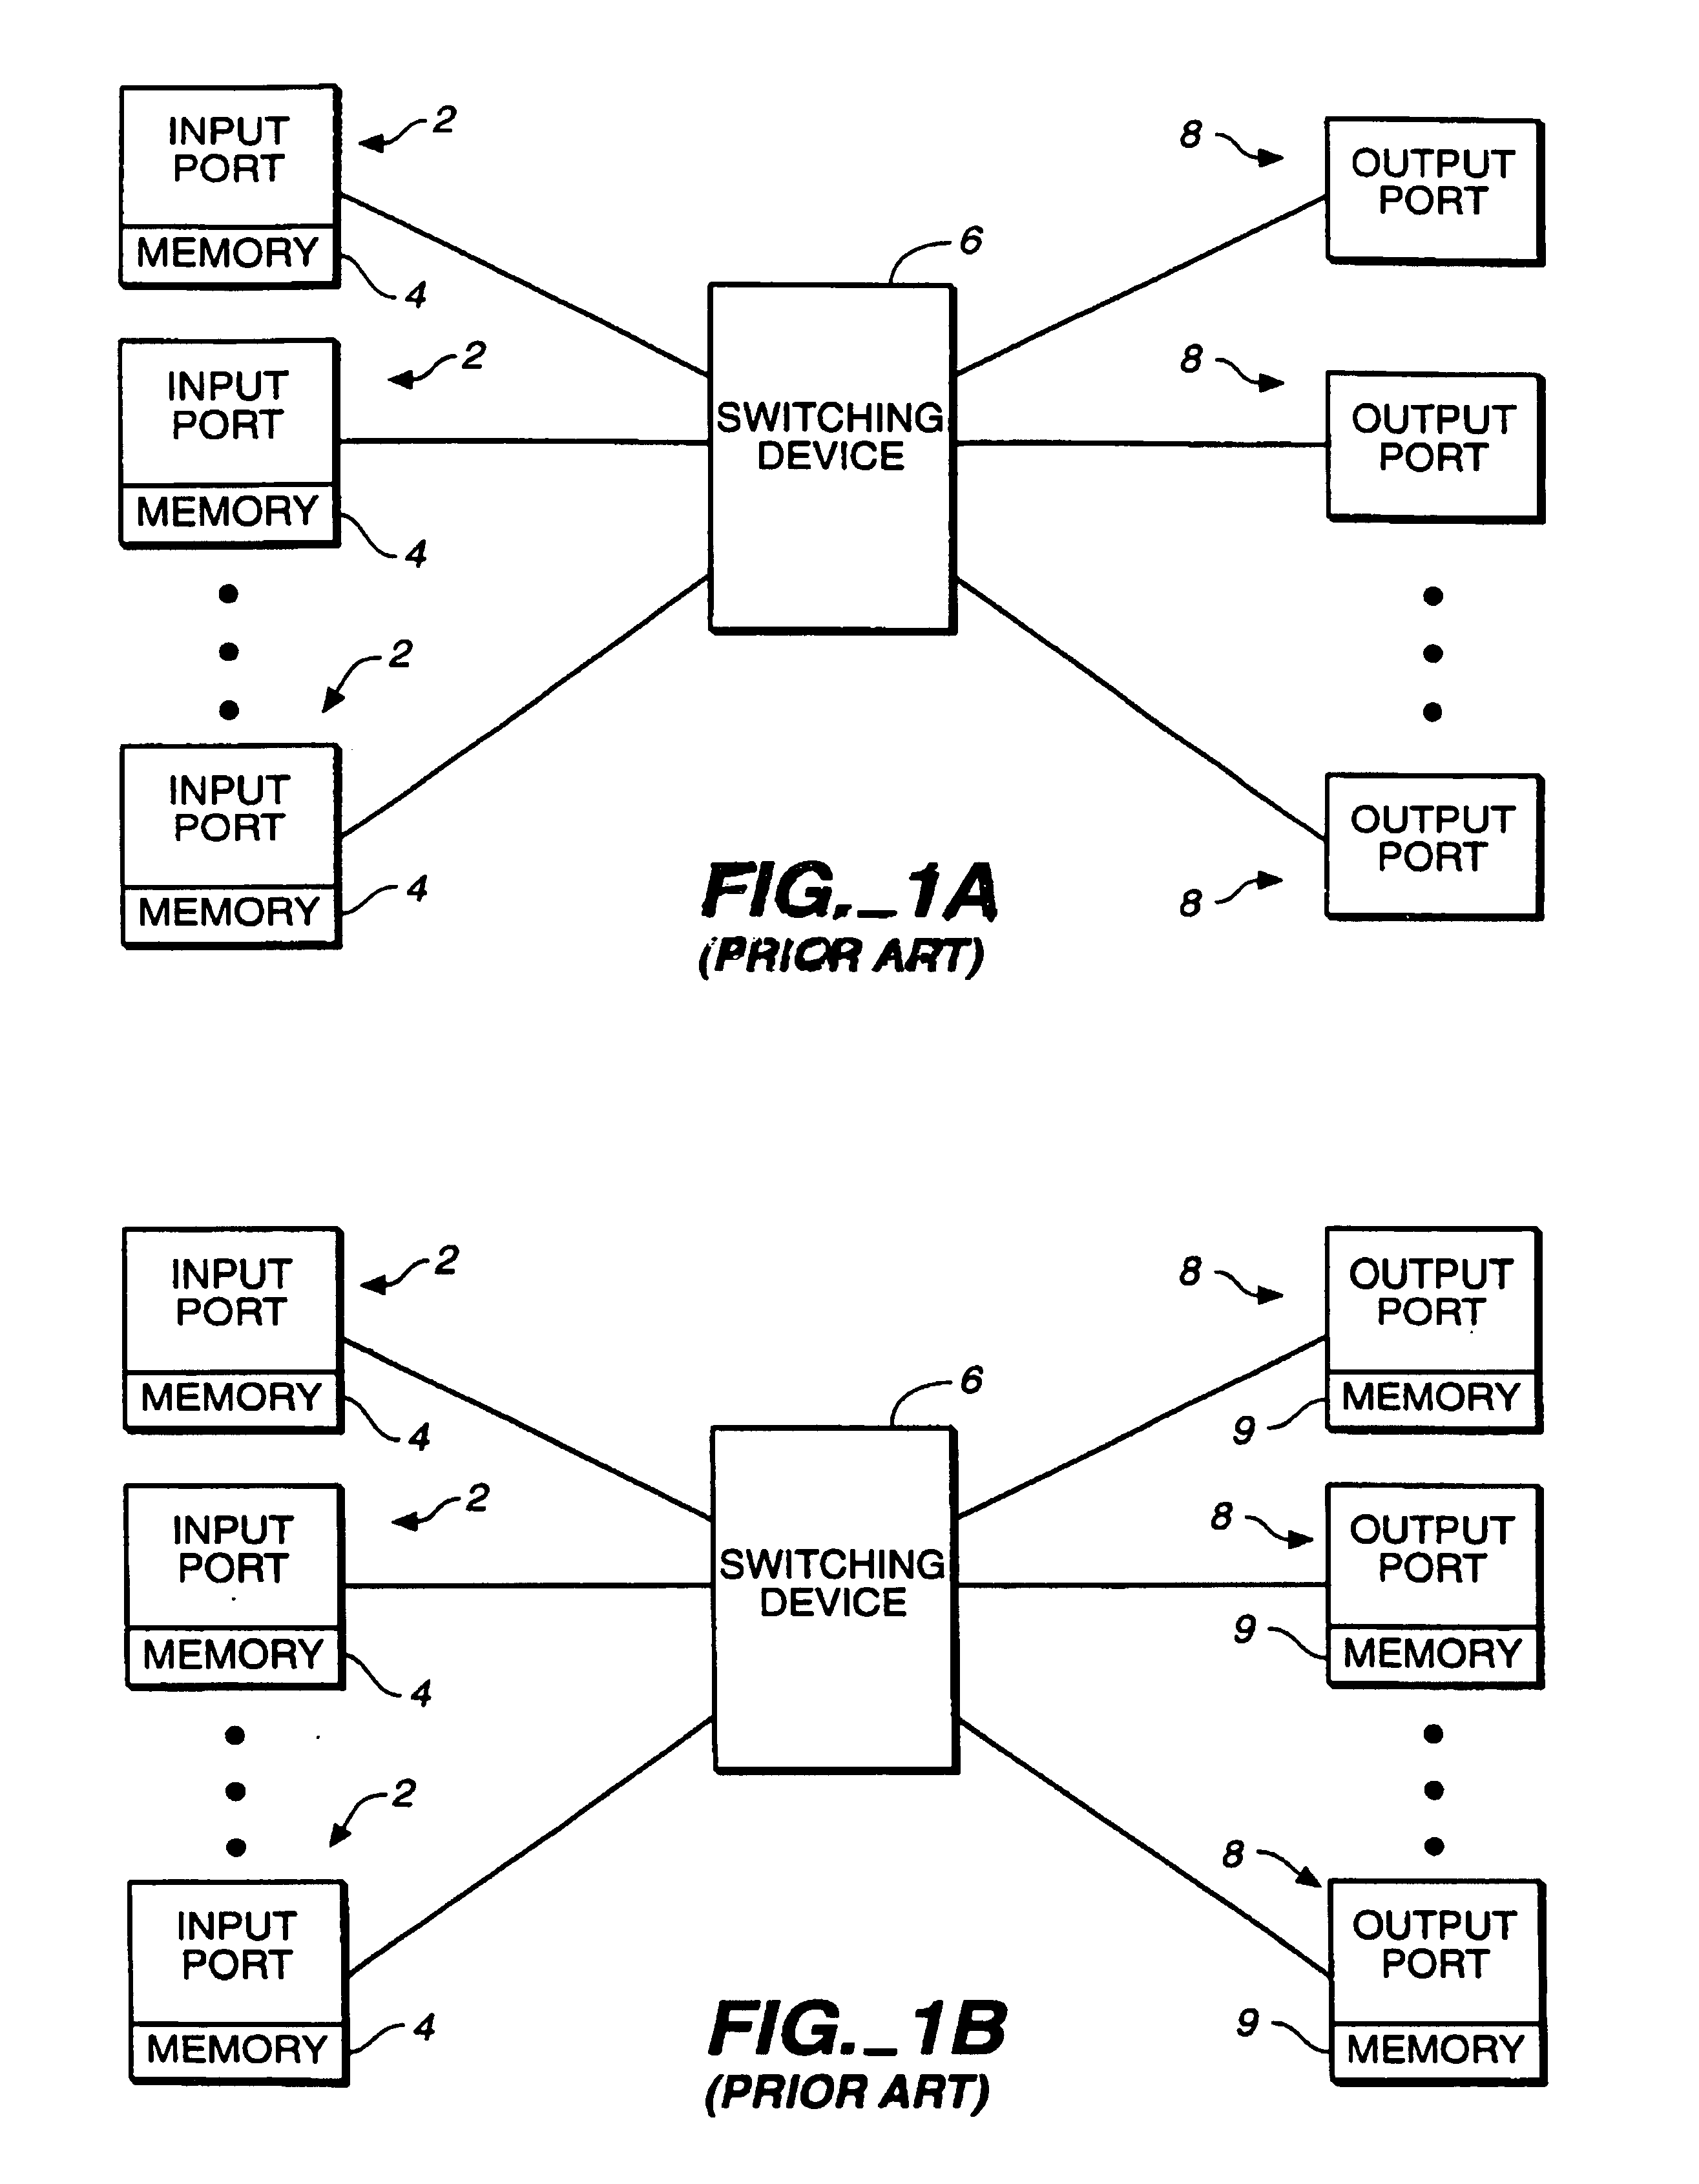 Separation of data and control in a switching device